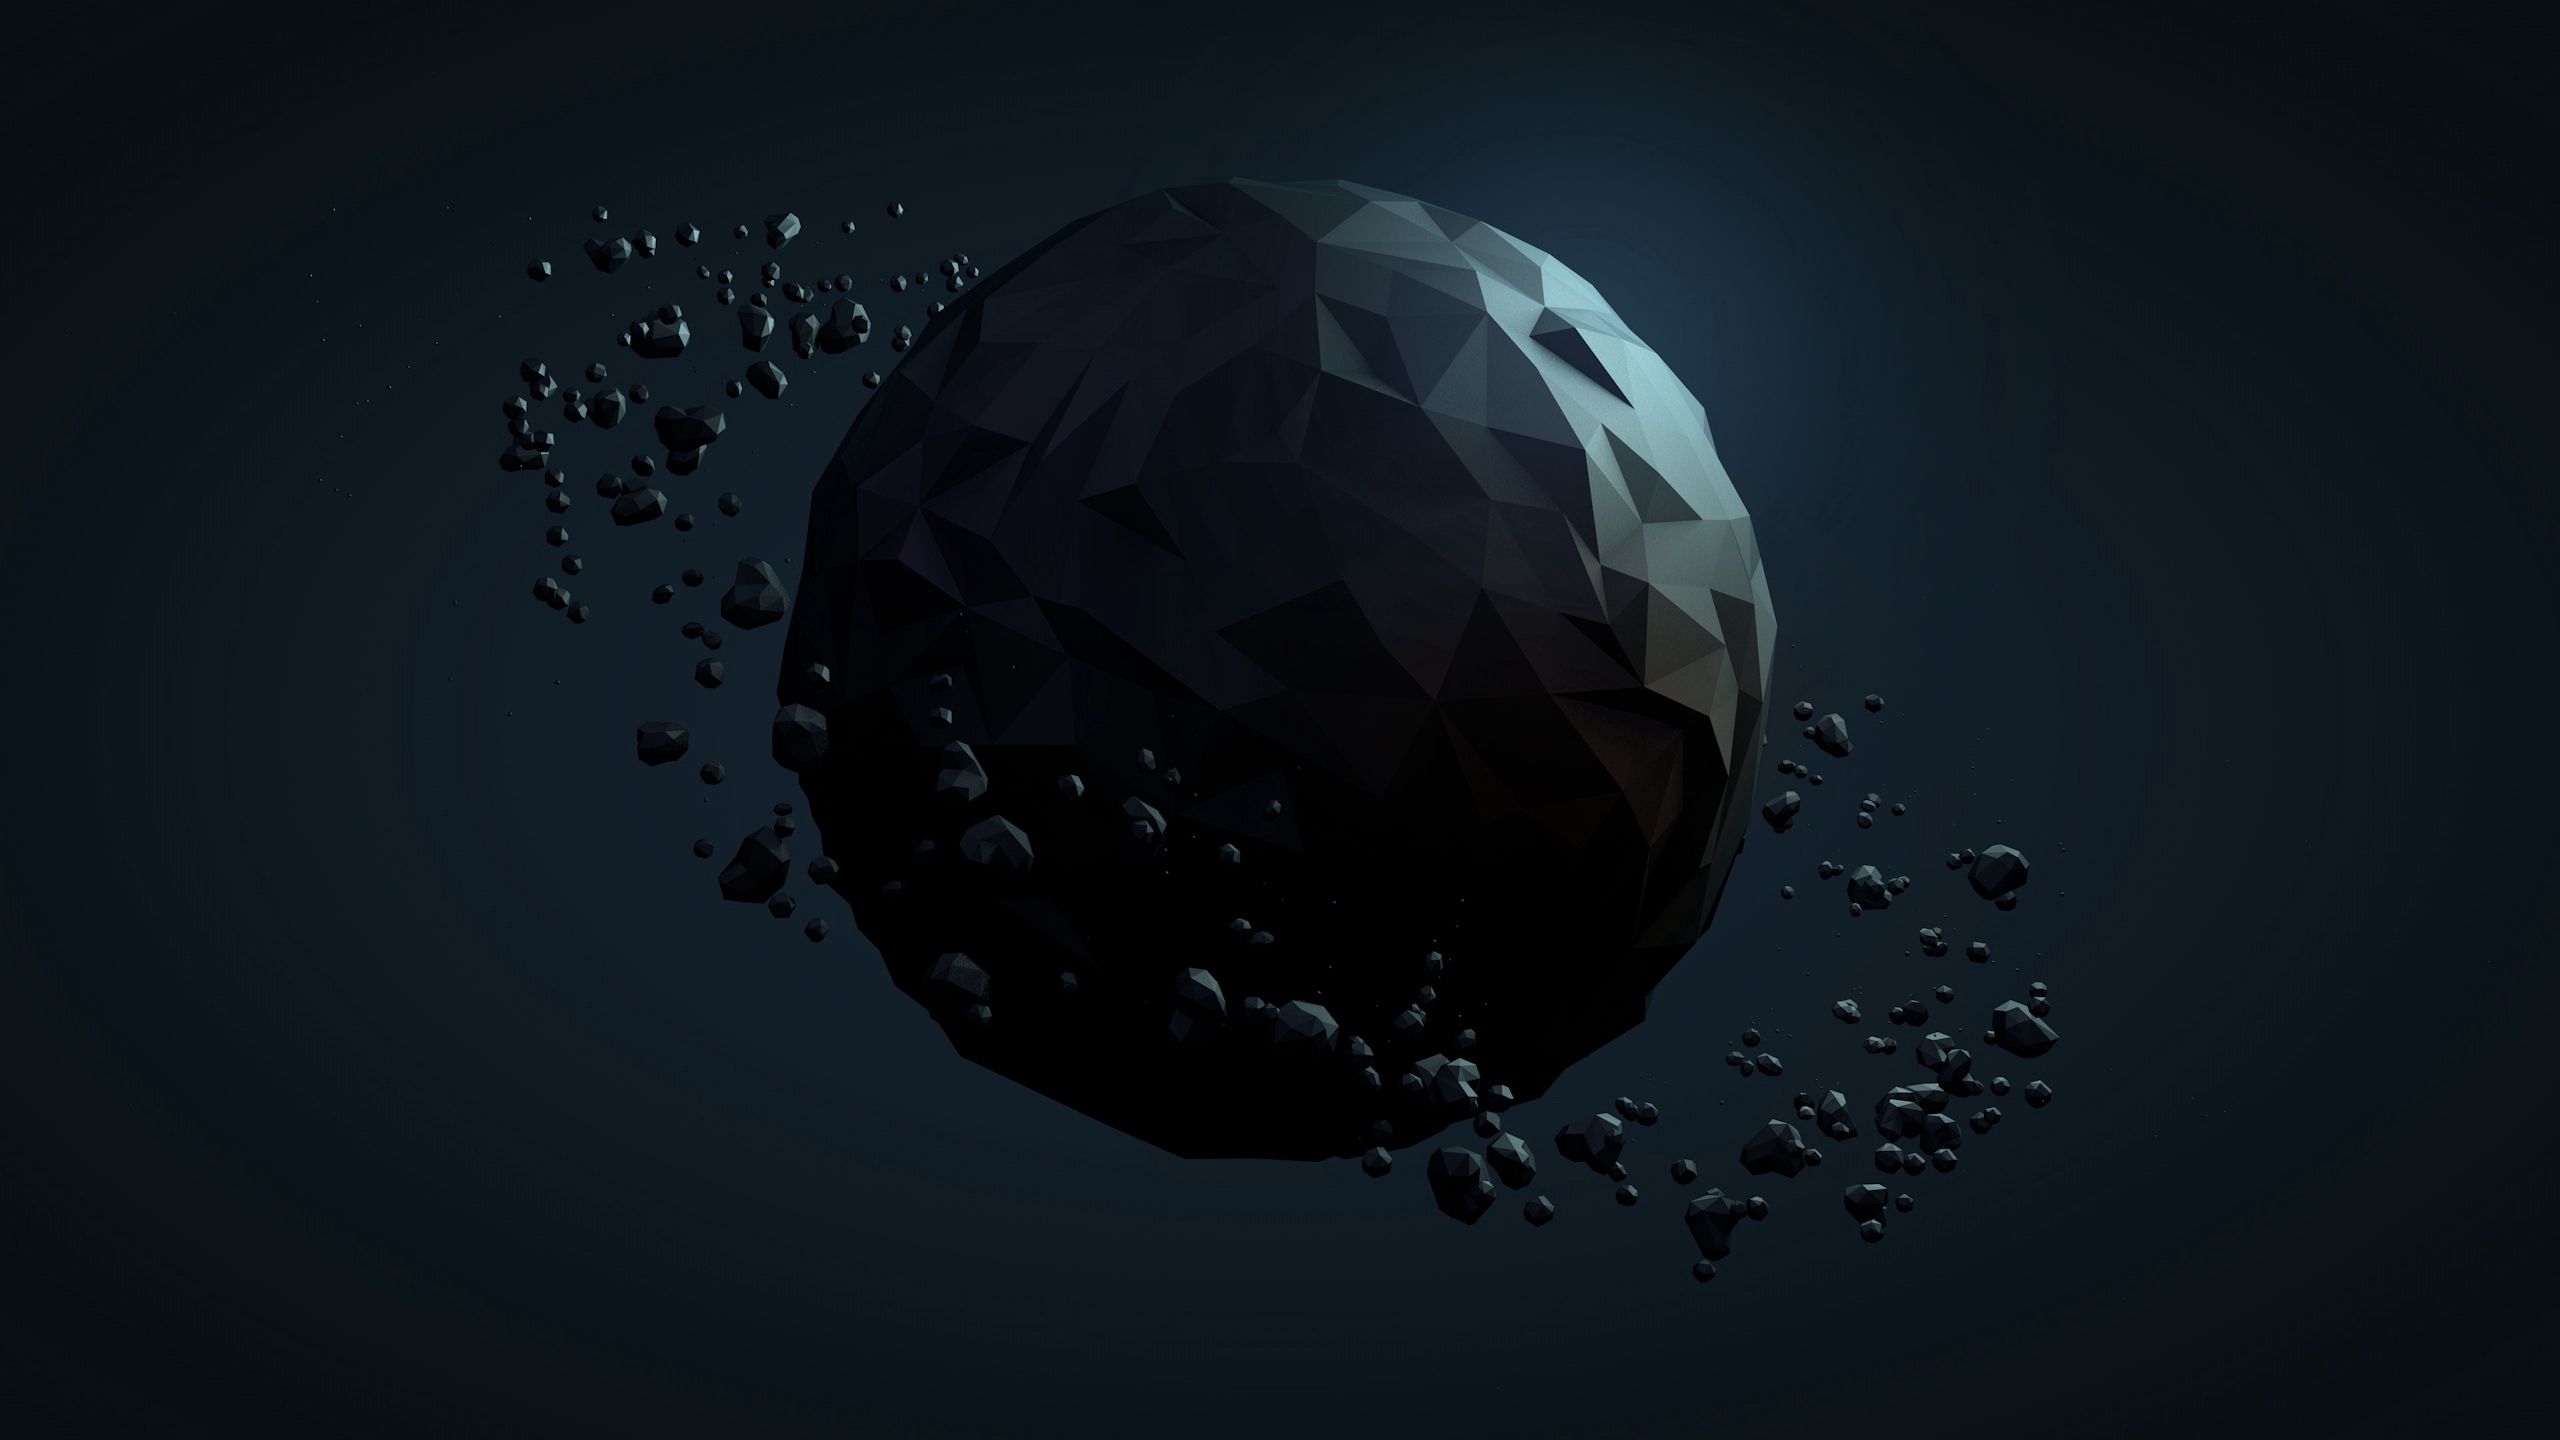 dark, abstract, background, ball, planet FHD, 4K, UHD